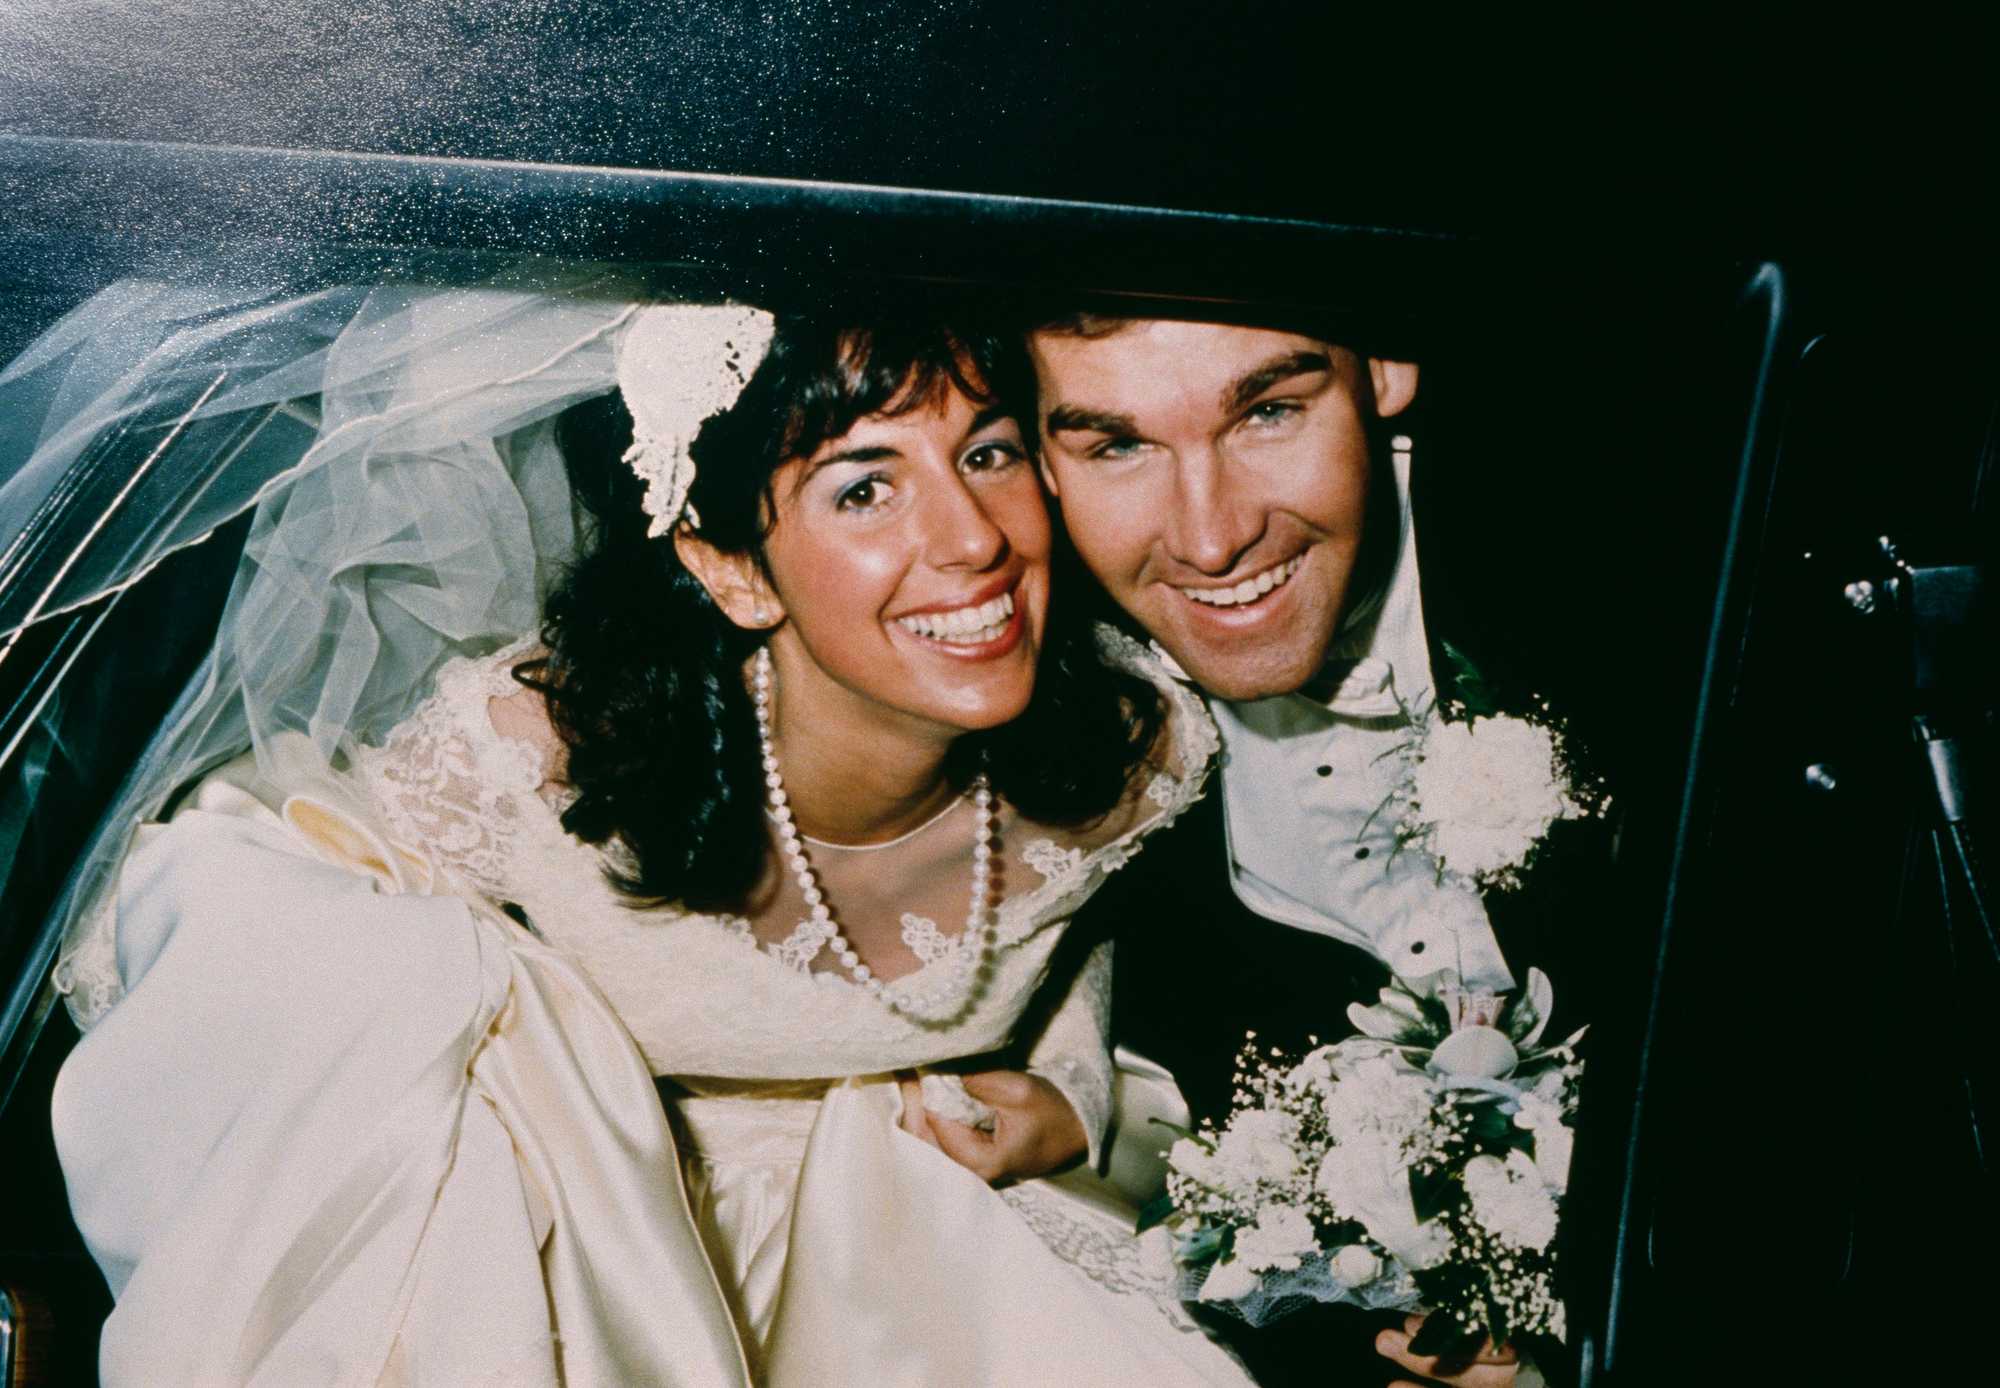 Carol and Charles Stuart on their wedding day on Oct. 13, 1985.